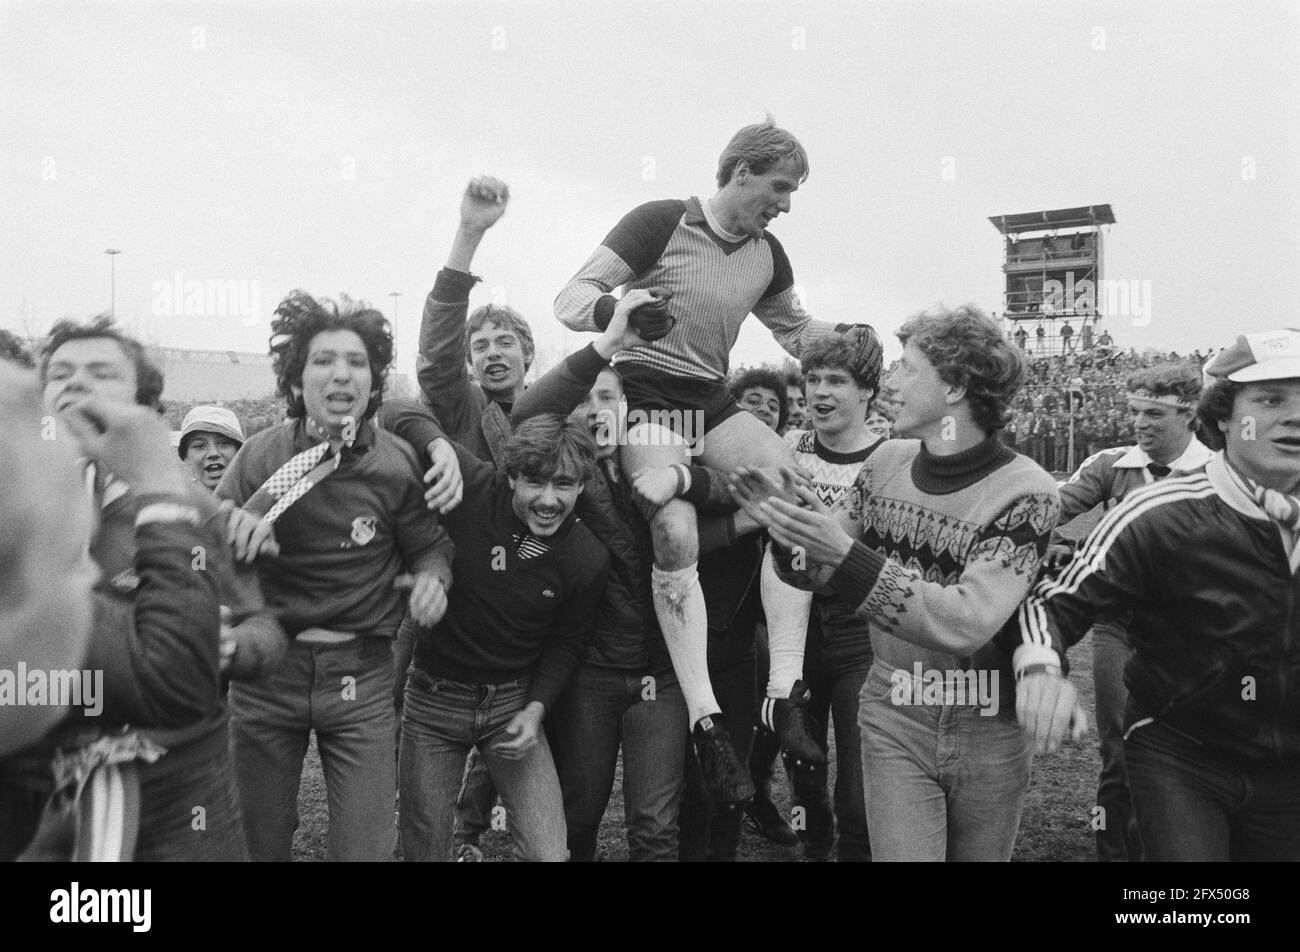 FC Utrecht against Haarlem (KNVB) 2-0. Goalkeeper Van Breukelen on shoulders with fans, 28 April 1982, FANS, goalkeepers, sports, soccer, The Netherlands, 20th century press agency photo, news to remember, documentary, historic photography 1945-1990, visual stories, human history of the Twentieth Century, capturing moments in time Stock Photo